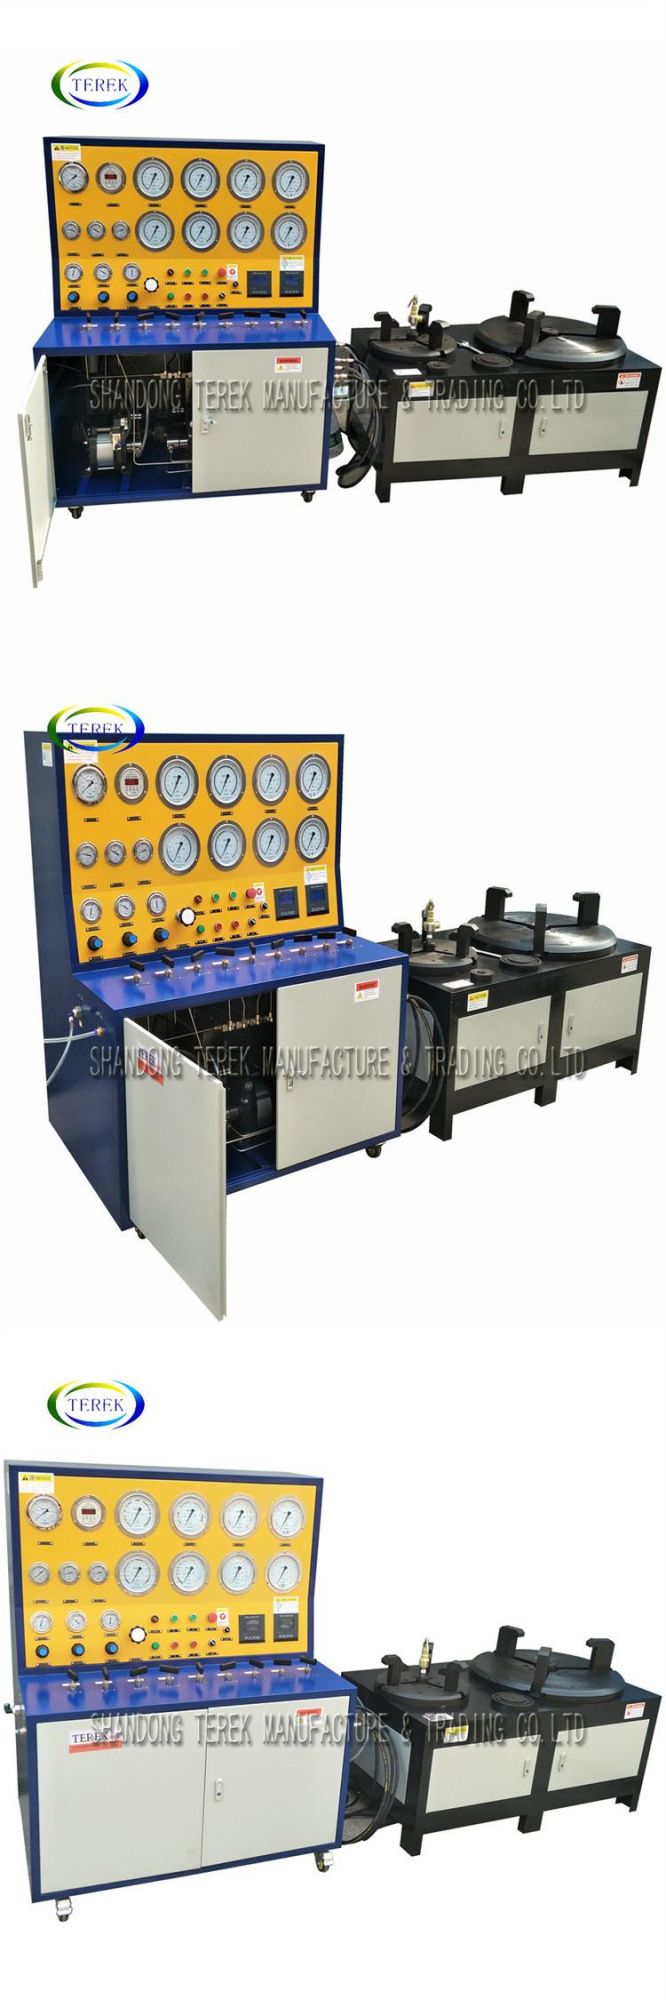 Pneumatic Air and Liquid Booster Pump DN10-DN450 40MPa Pressure Relief Valve Hydraulic Test Bench for Sale